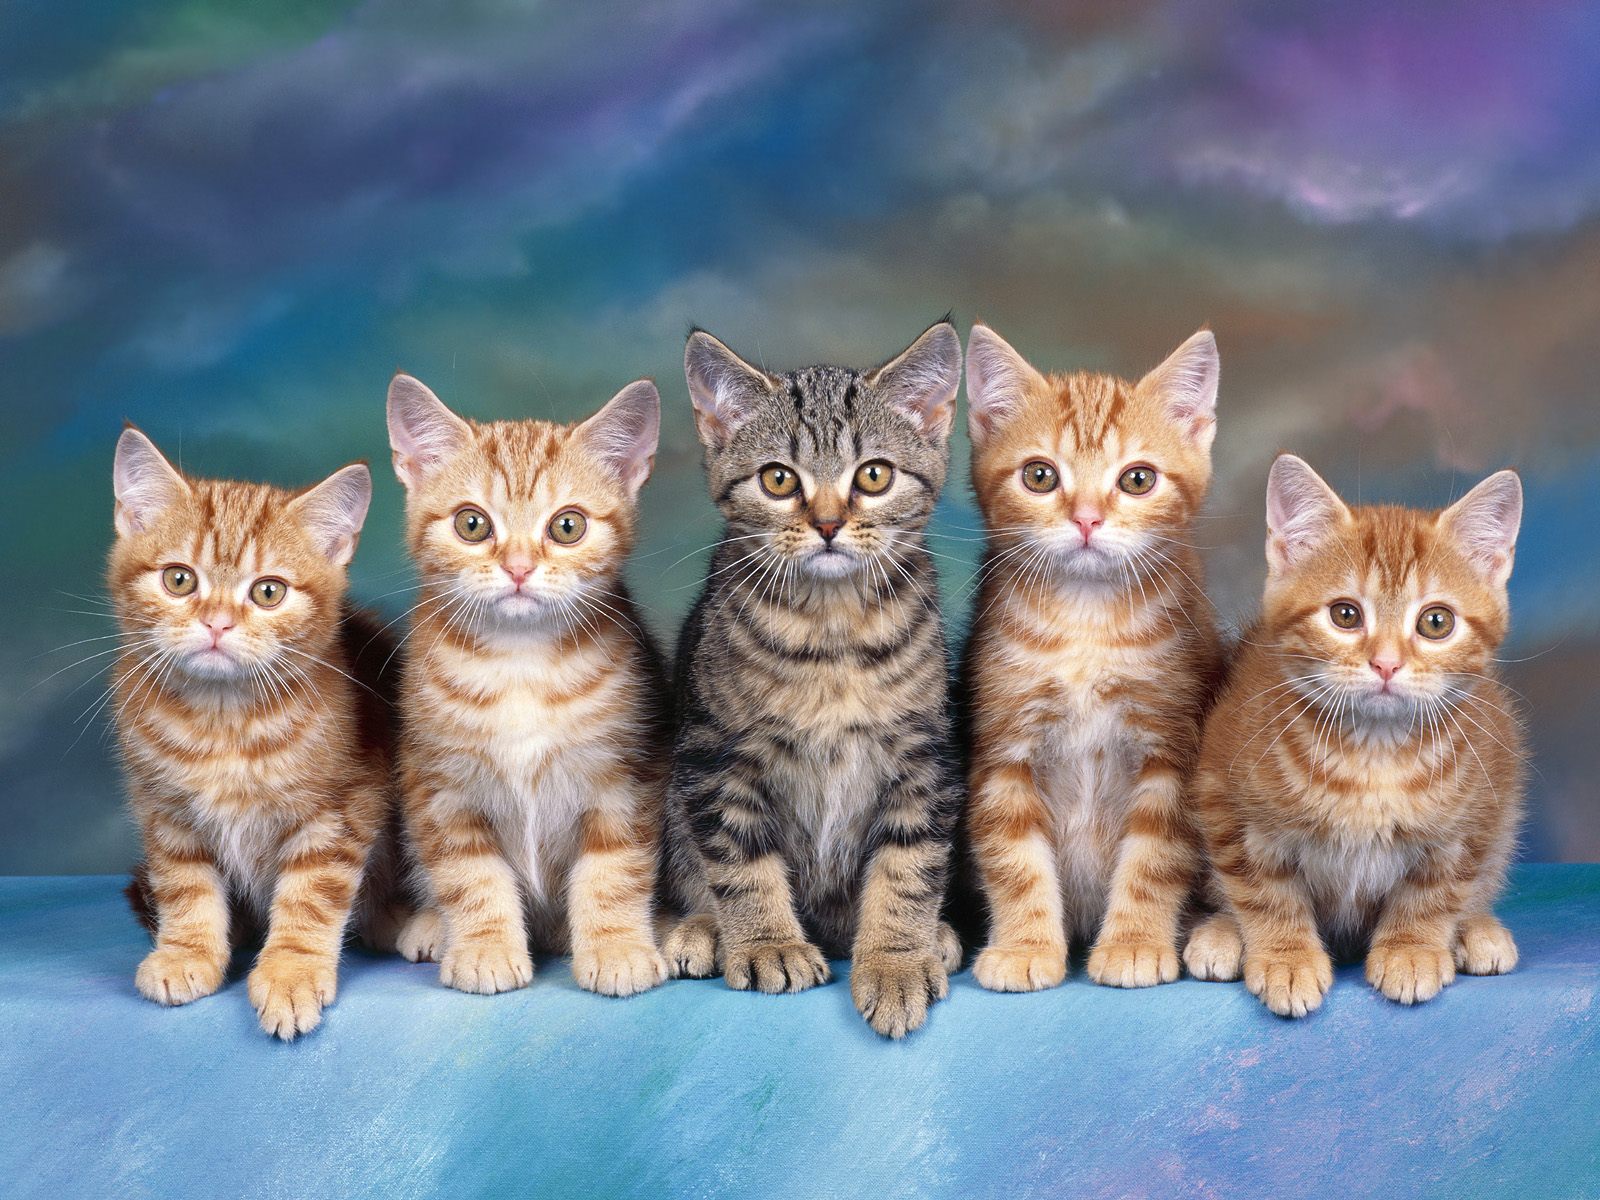 Tabby Kittens   Free Animals Wallpaper Image with Cats